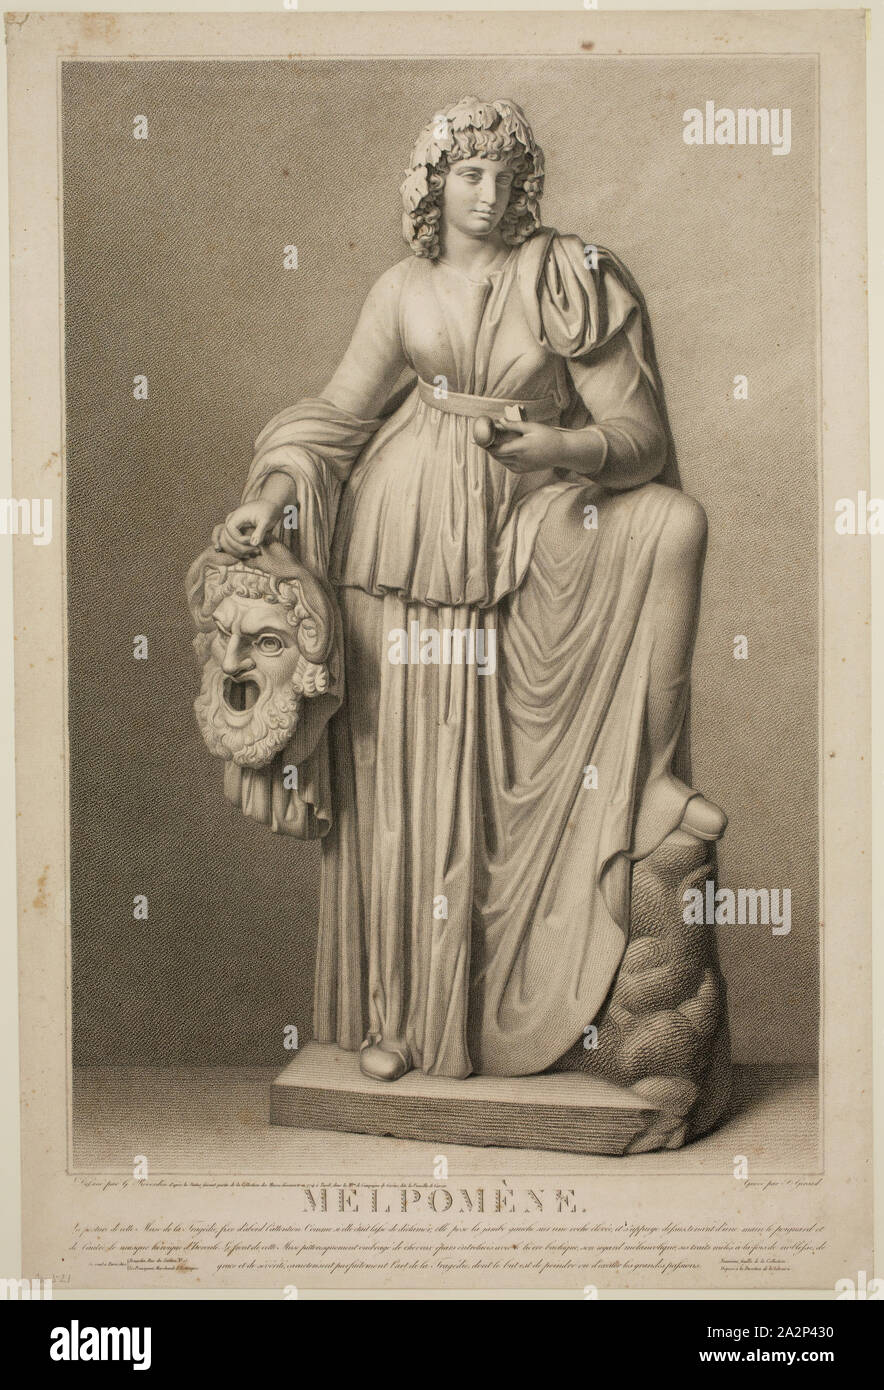 Alexis Francois Girard, French, 1787-1870, after Gedeon Francois Reverdin, French, 1772-1828, Melpomene, 19th Century, Crayon manner engraving printed in black on laid paper, image: 21 5/8 x 14 3/4 in Stock Photo